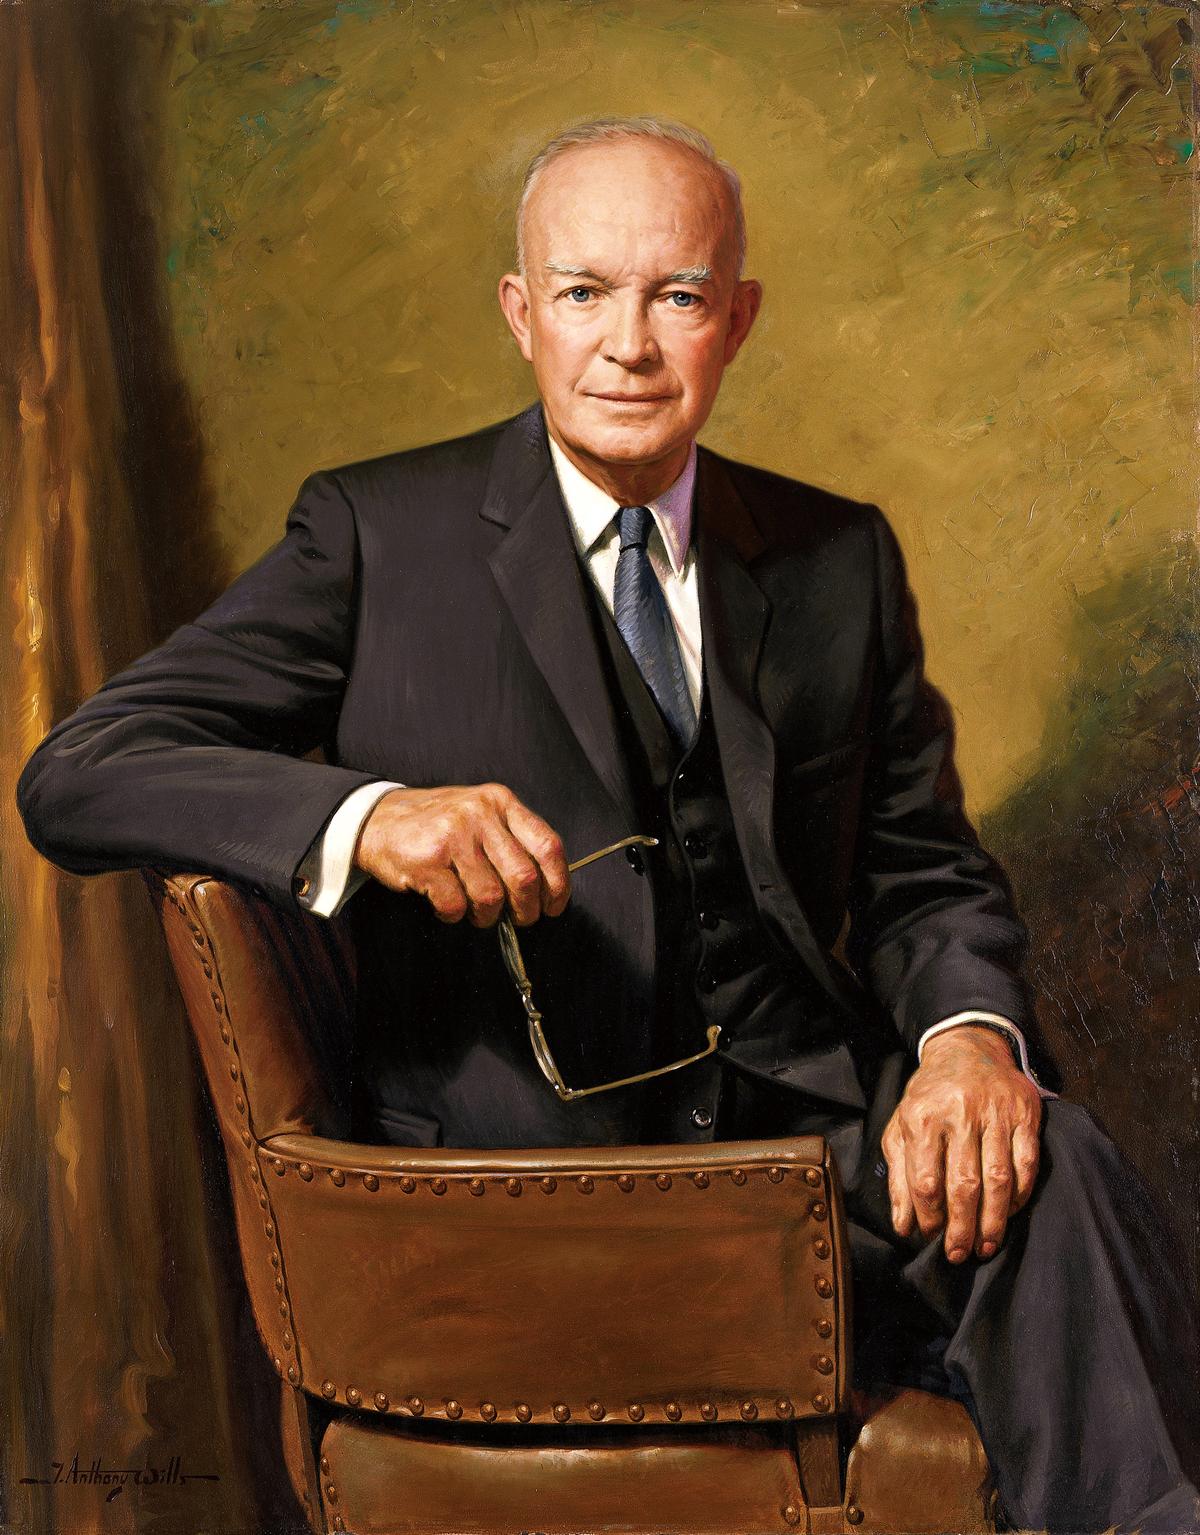 White House portrait of Dwight D. Eisenhower, 1967, by James Anthony Wills. (Public Domain)